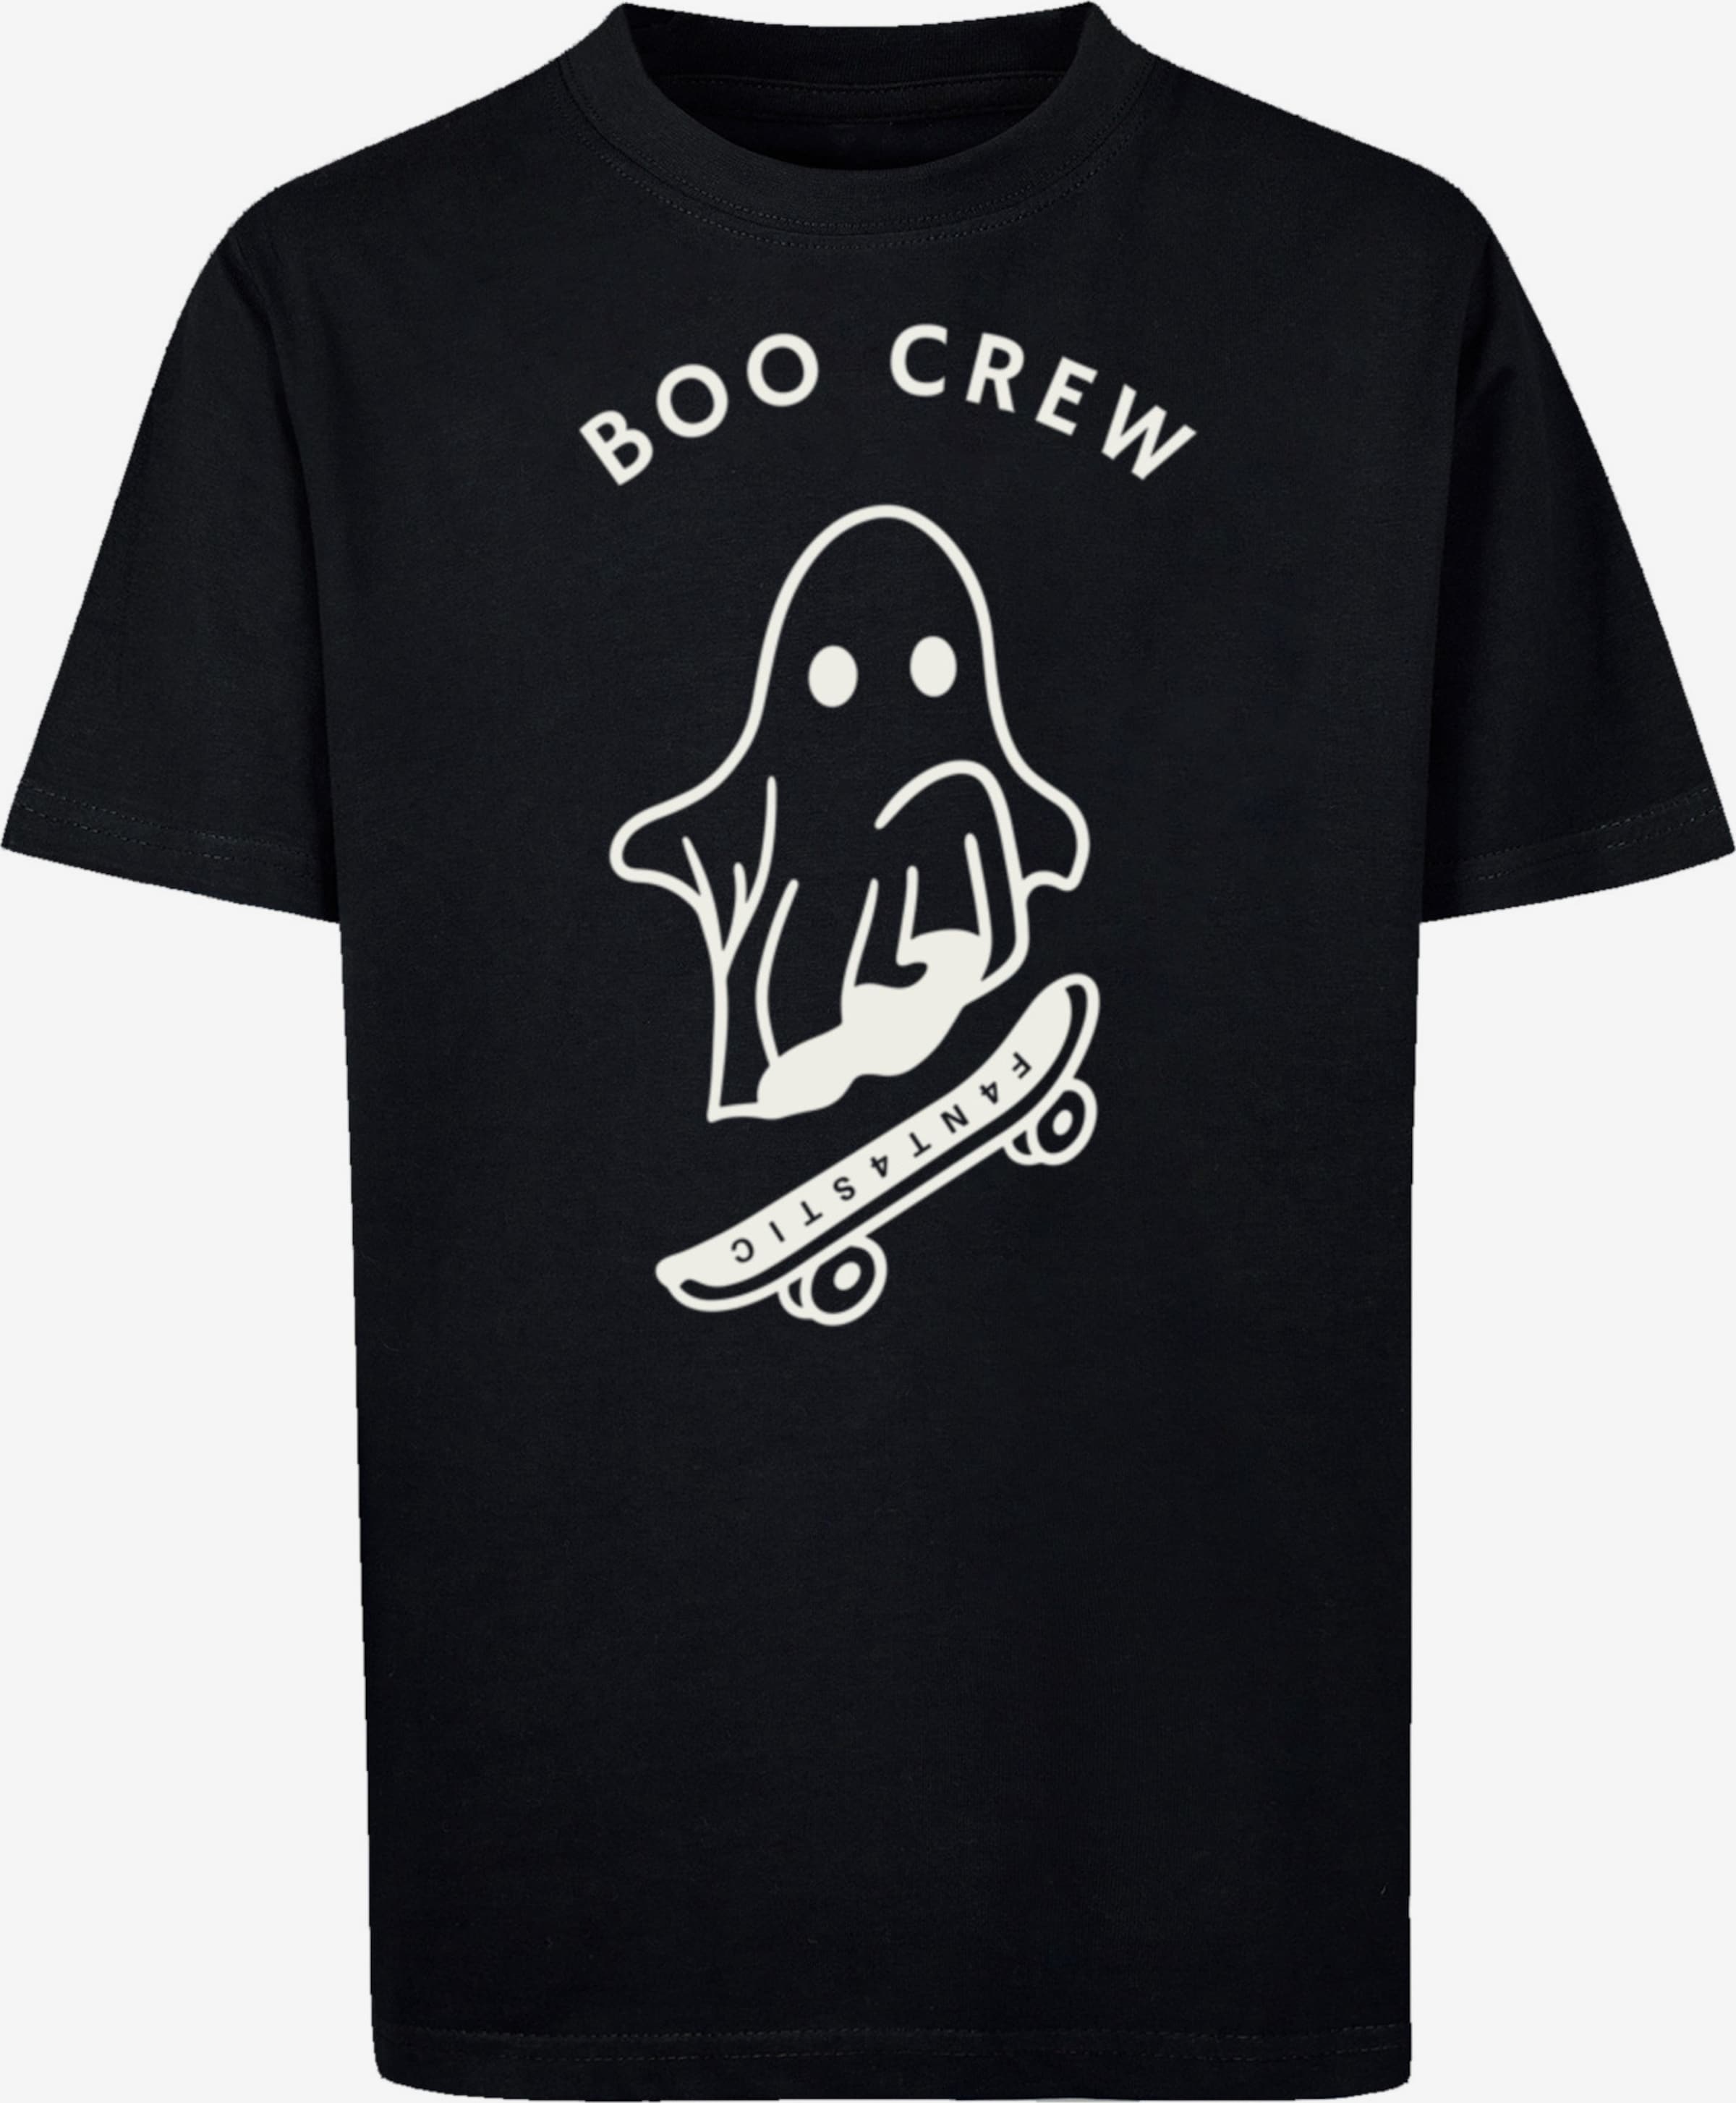 YOU in \'Boo Crew ABOUT | F4NT4STIC Schwarz Halloween\' T-Shirt